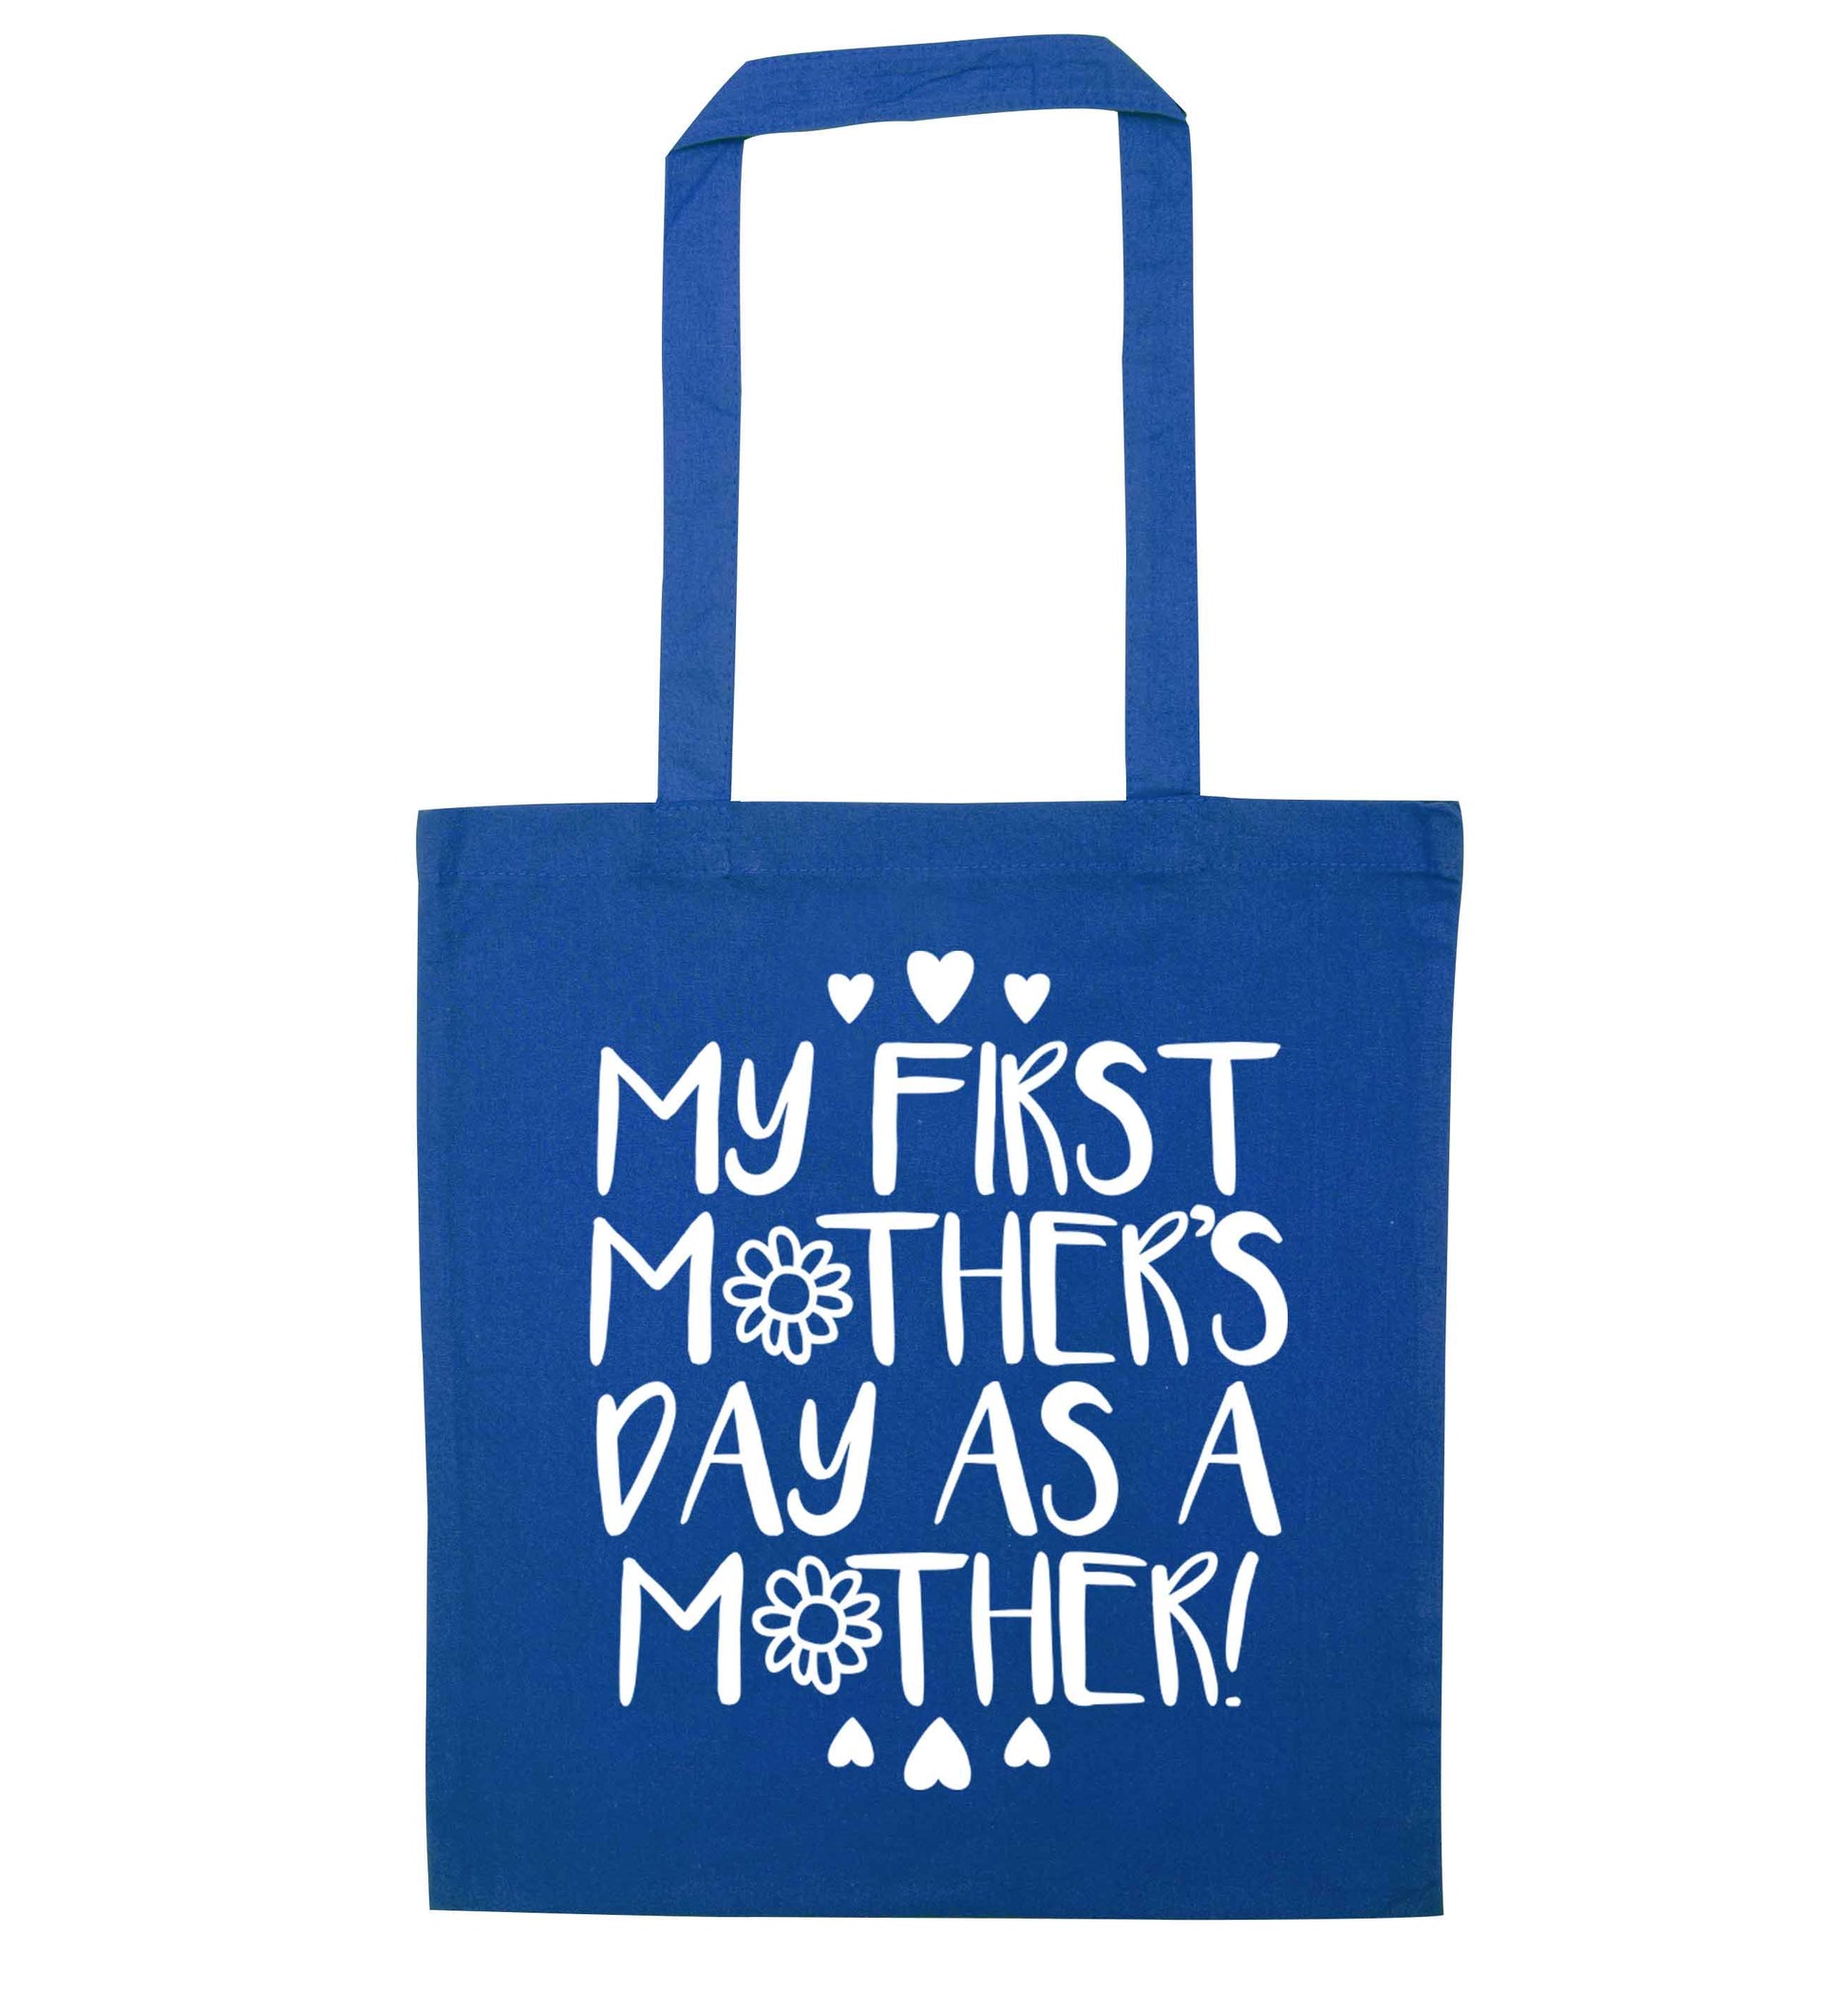 It's my first mother's day as a mother blue tote bag